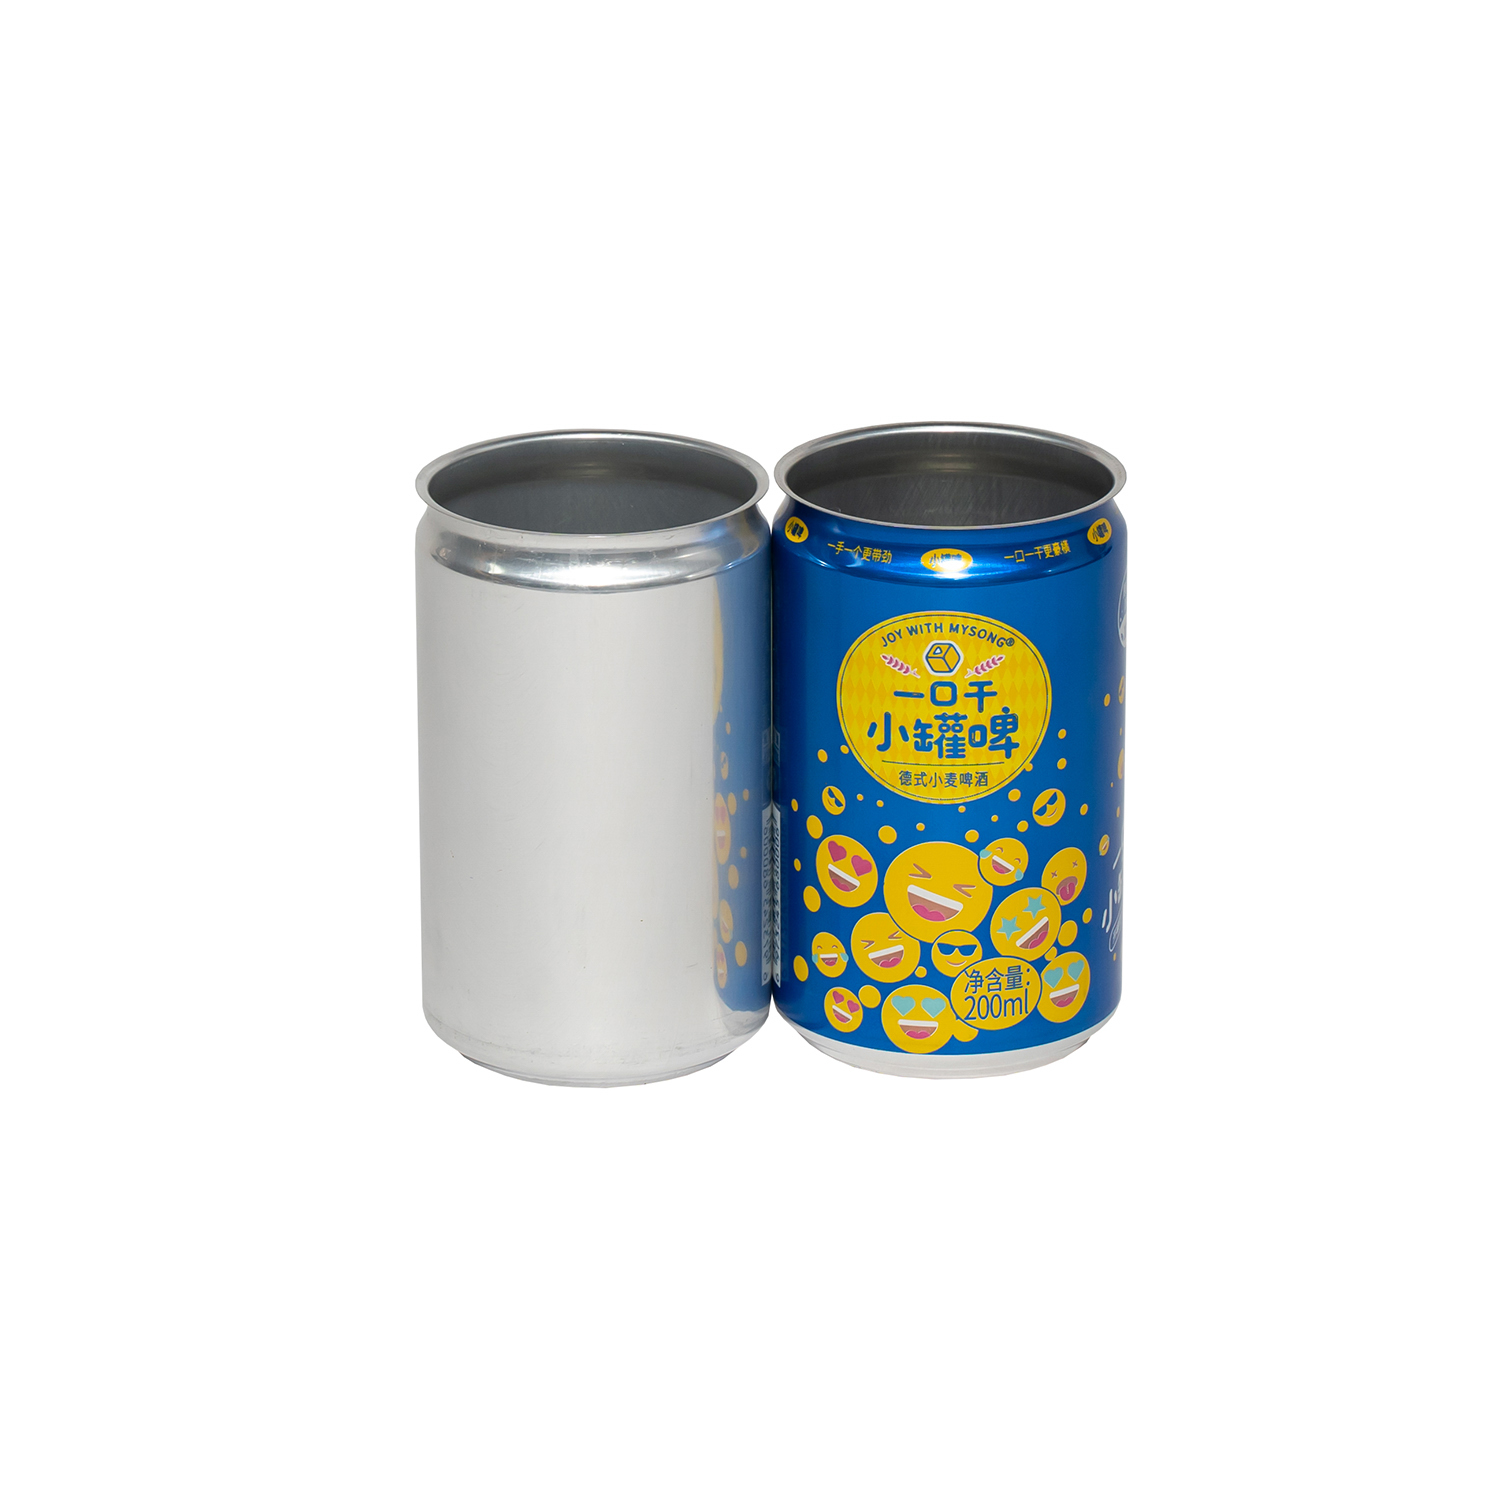 New Delivery for 473 Ml - Sleek can 200ml – Erjin